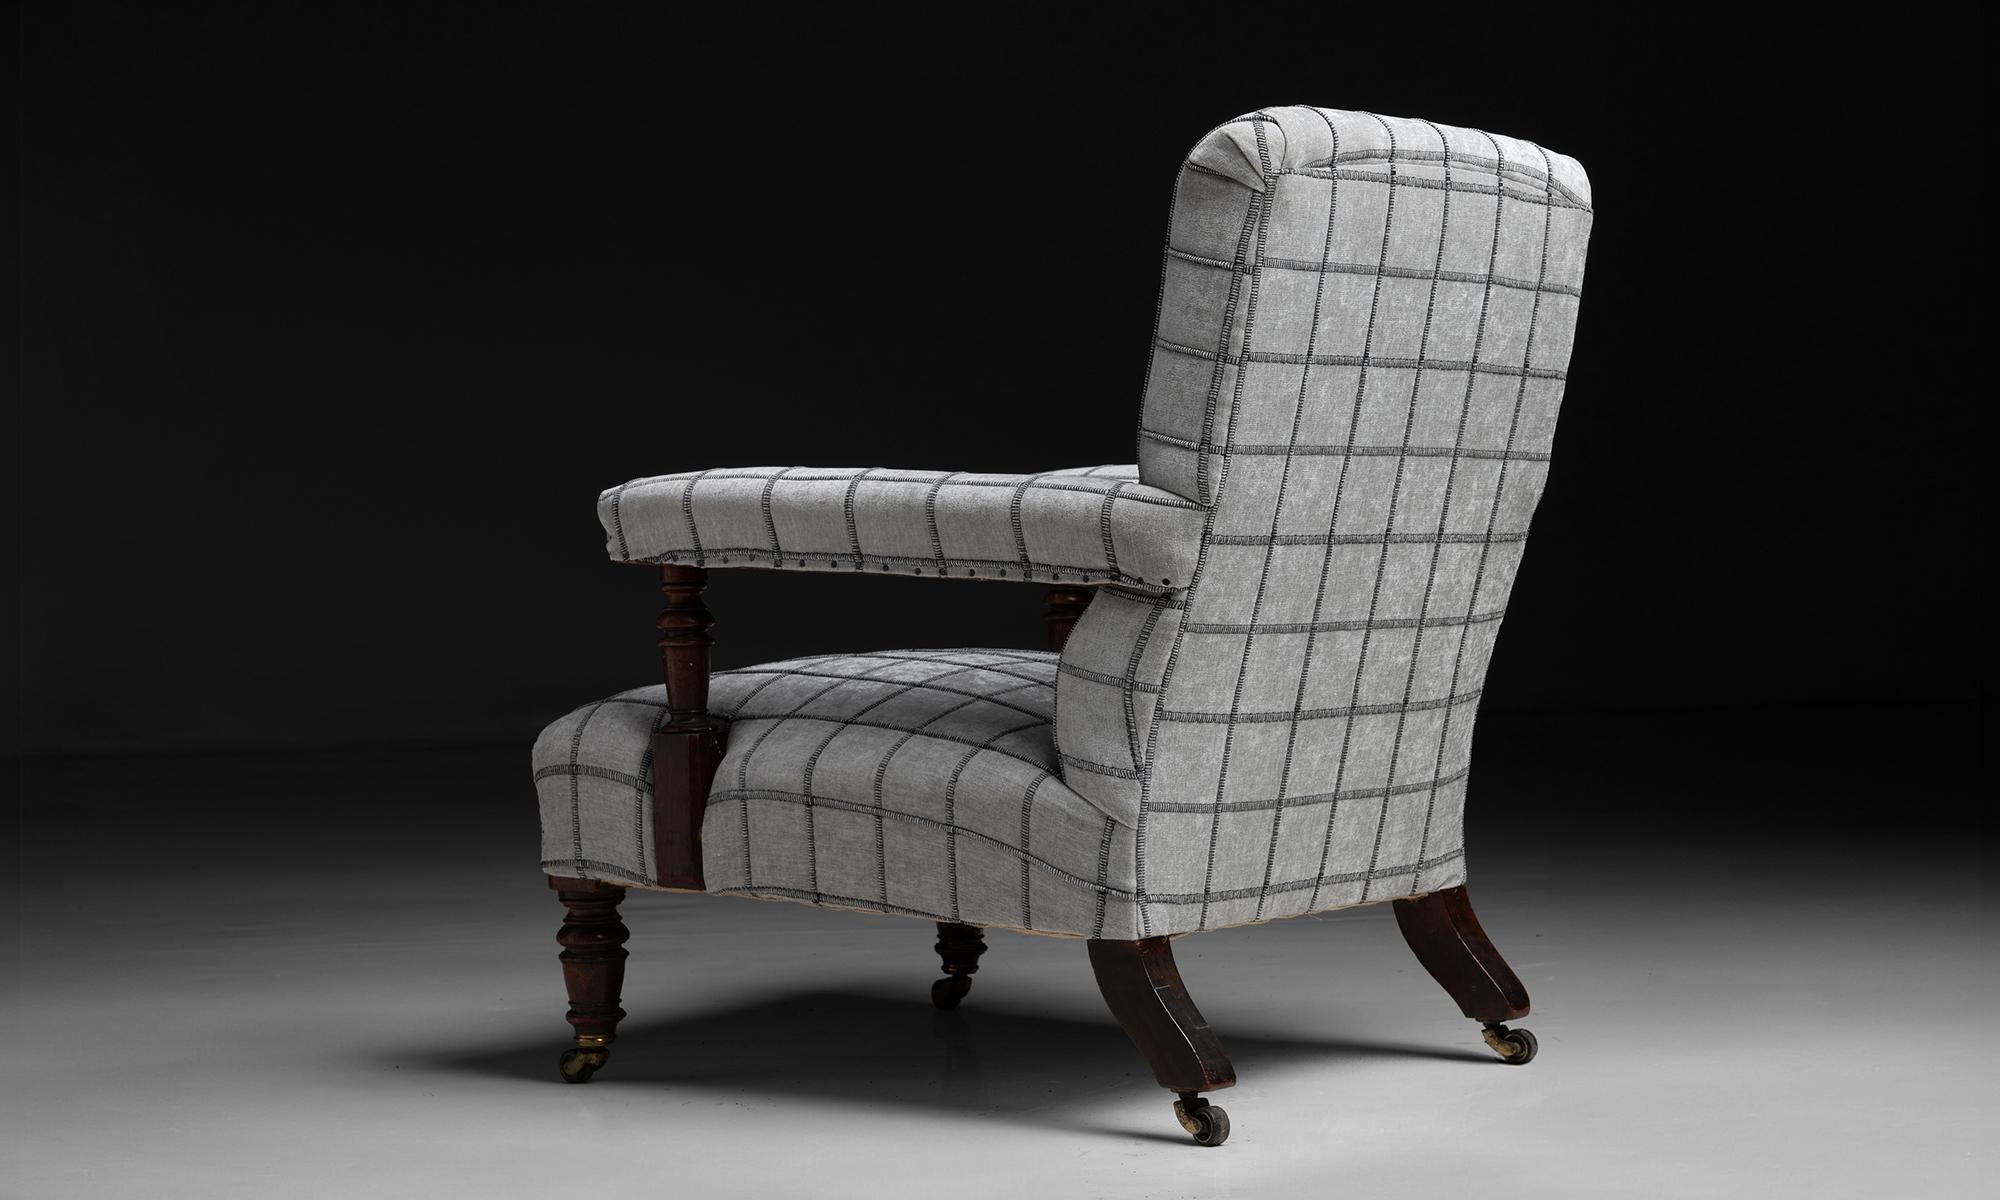 Armchair in Pierre Frey Fabric
England circa 1850
Antique walnut frame newly upholstered in Pierre Frey Fabric
26”w x 32”d x 34.5”h x 14”seat